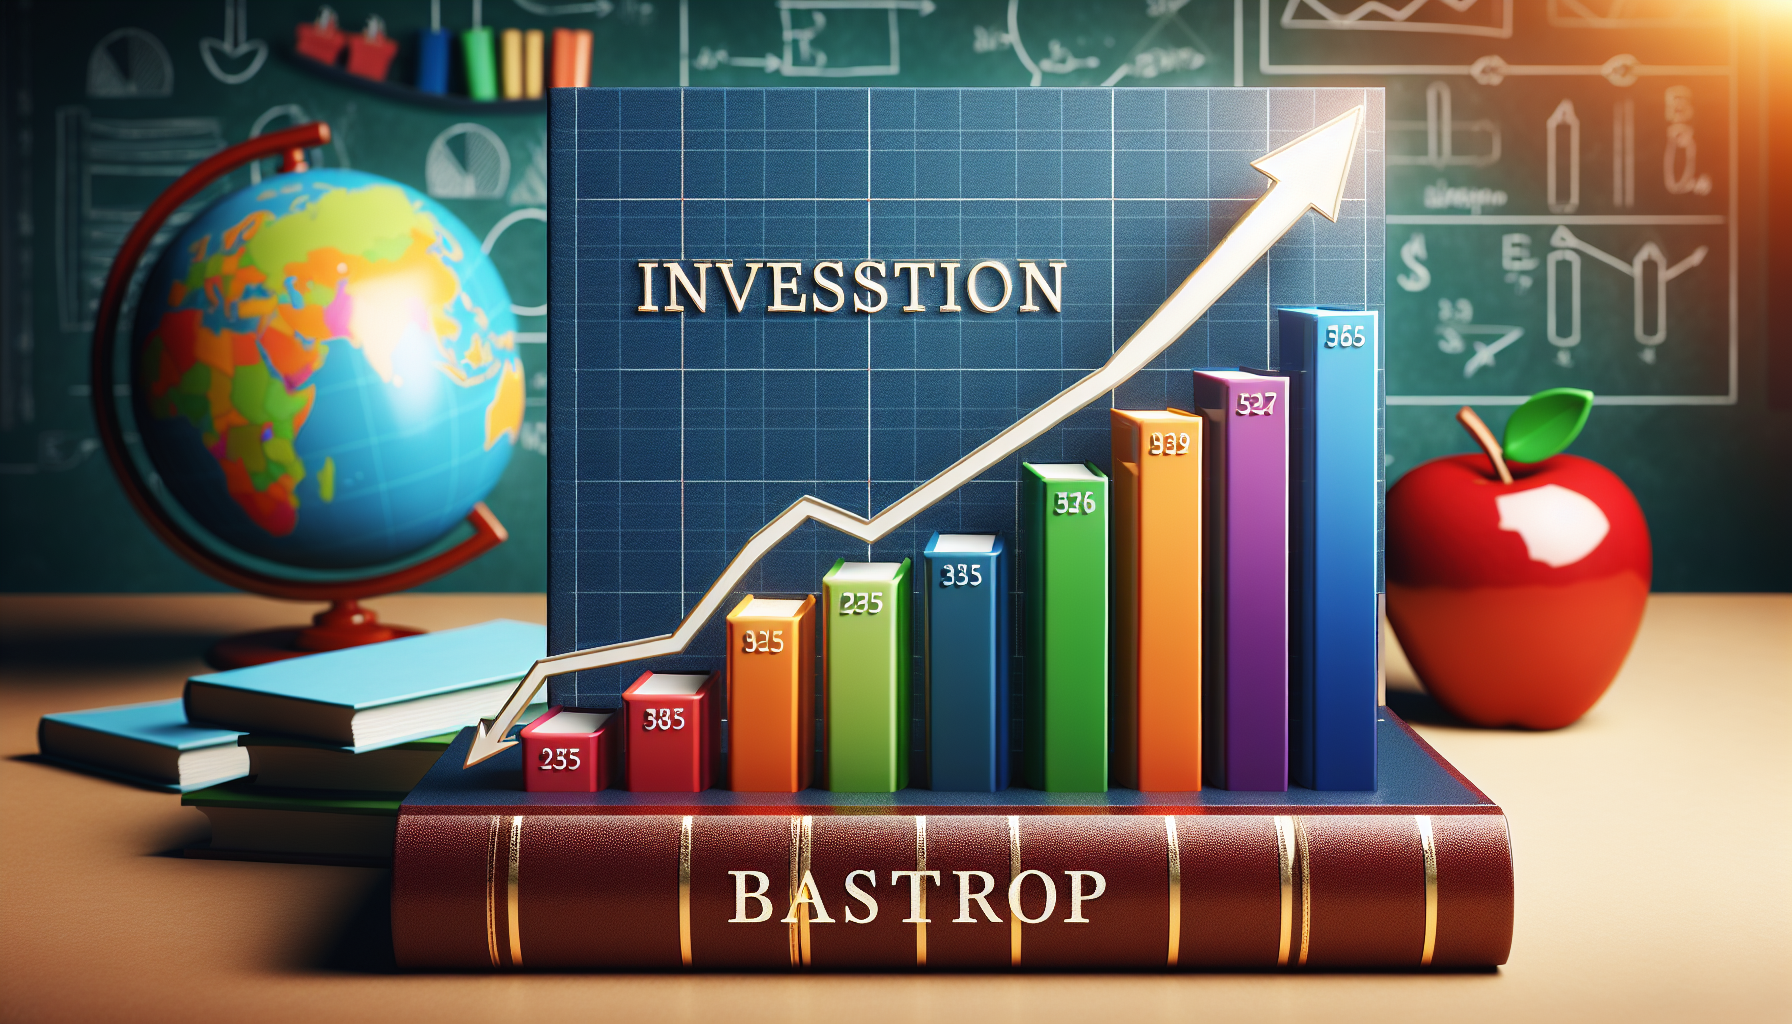 Financial overview chart depicting investment in education at Bastrop ISD